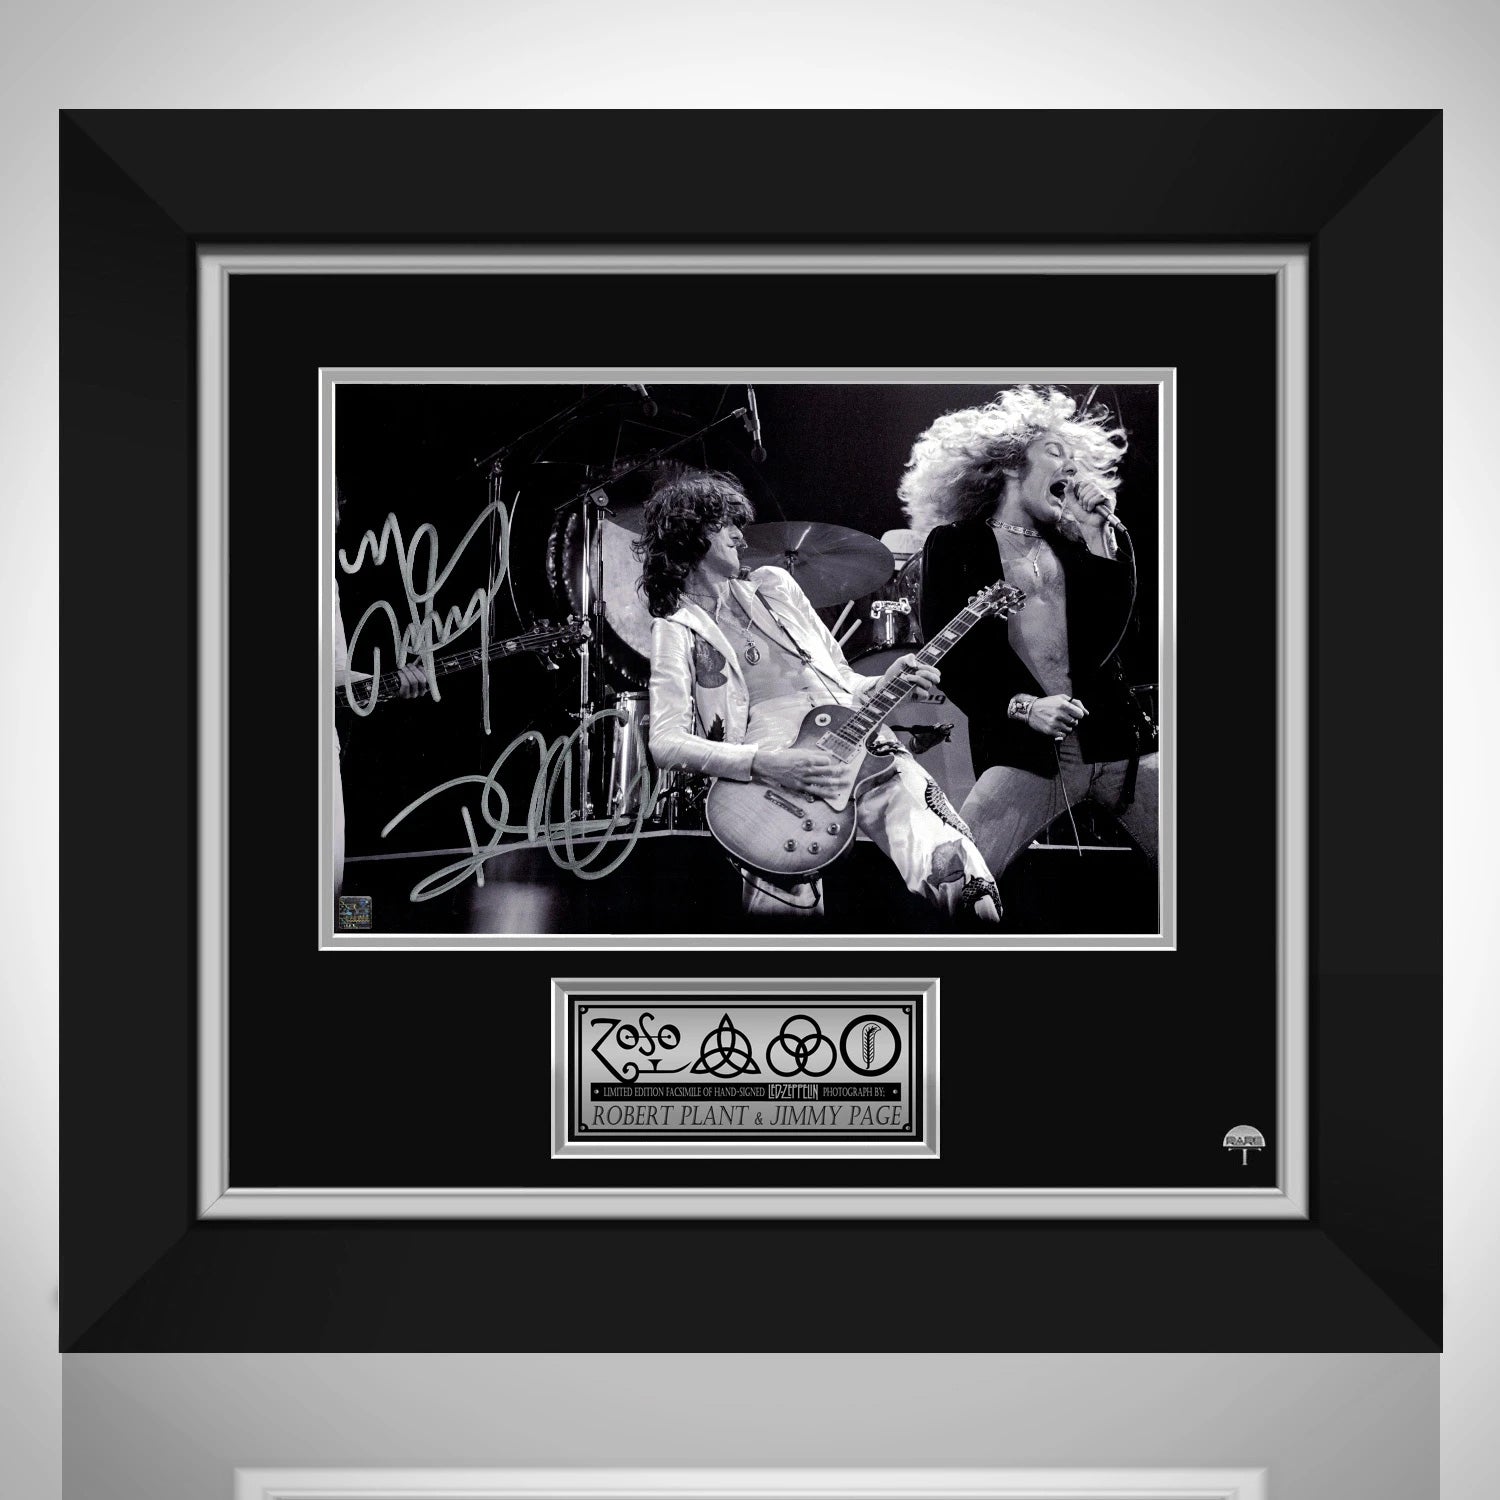 The Yardbirds - Having a Rave up with The Yardbirds LP Cover Limited  Signature Edition Custom Frame